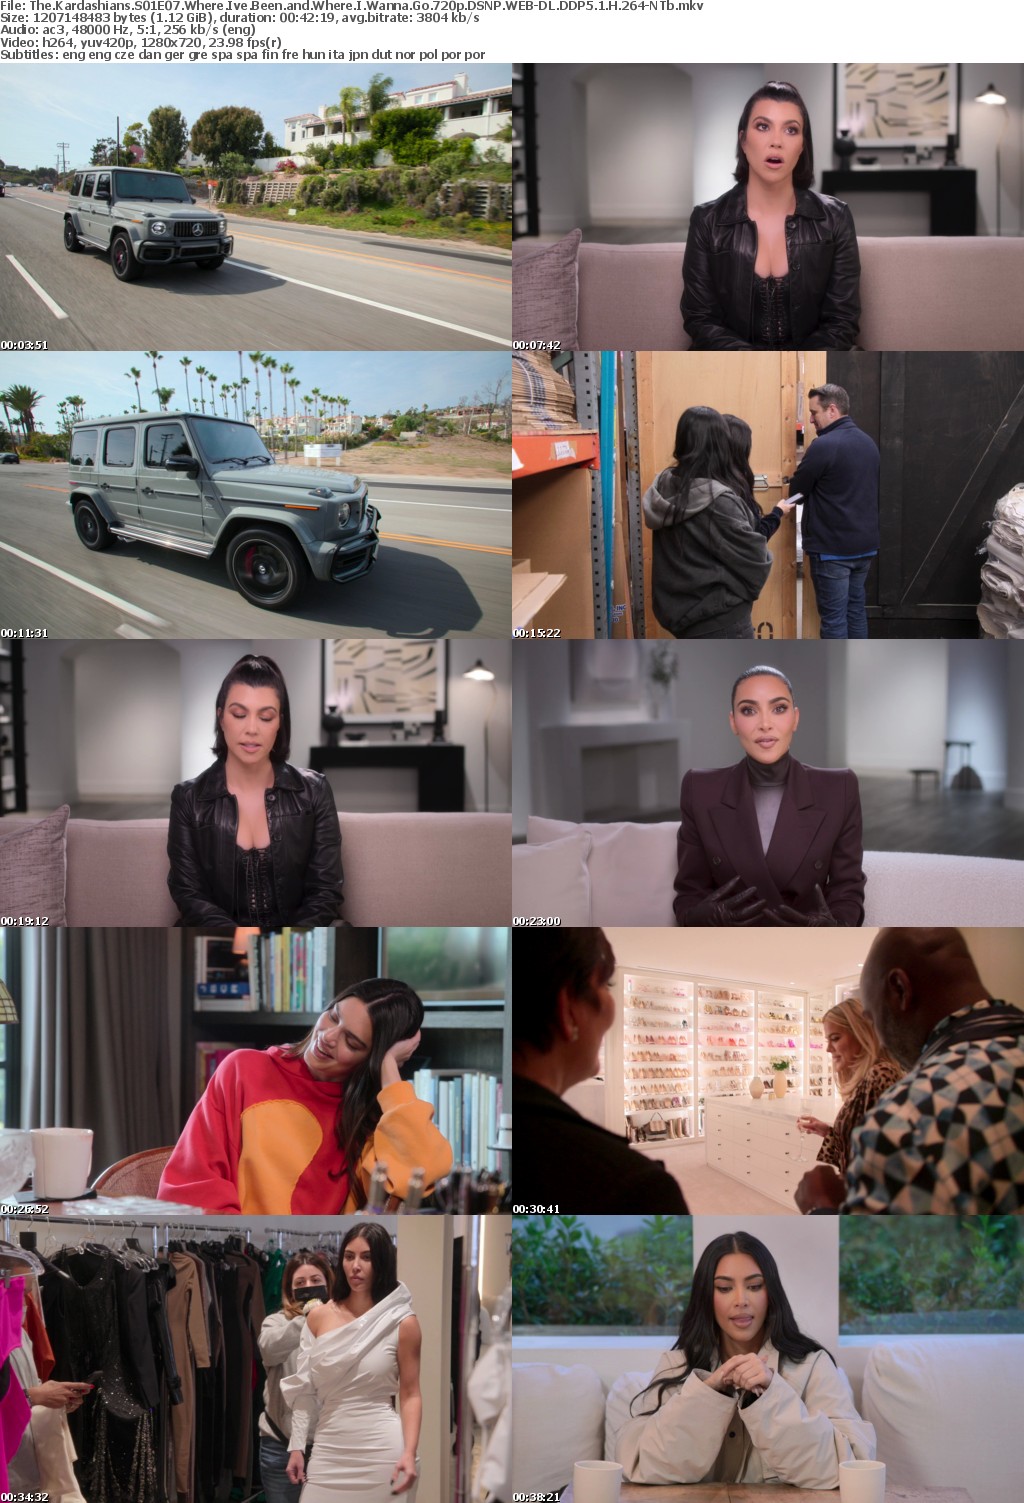 The Kardashians S01E07 Where Ive Been and Where I Wanna Go 720p DSNP WEBRip DDP5 1 x264-NTb